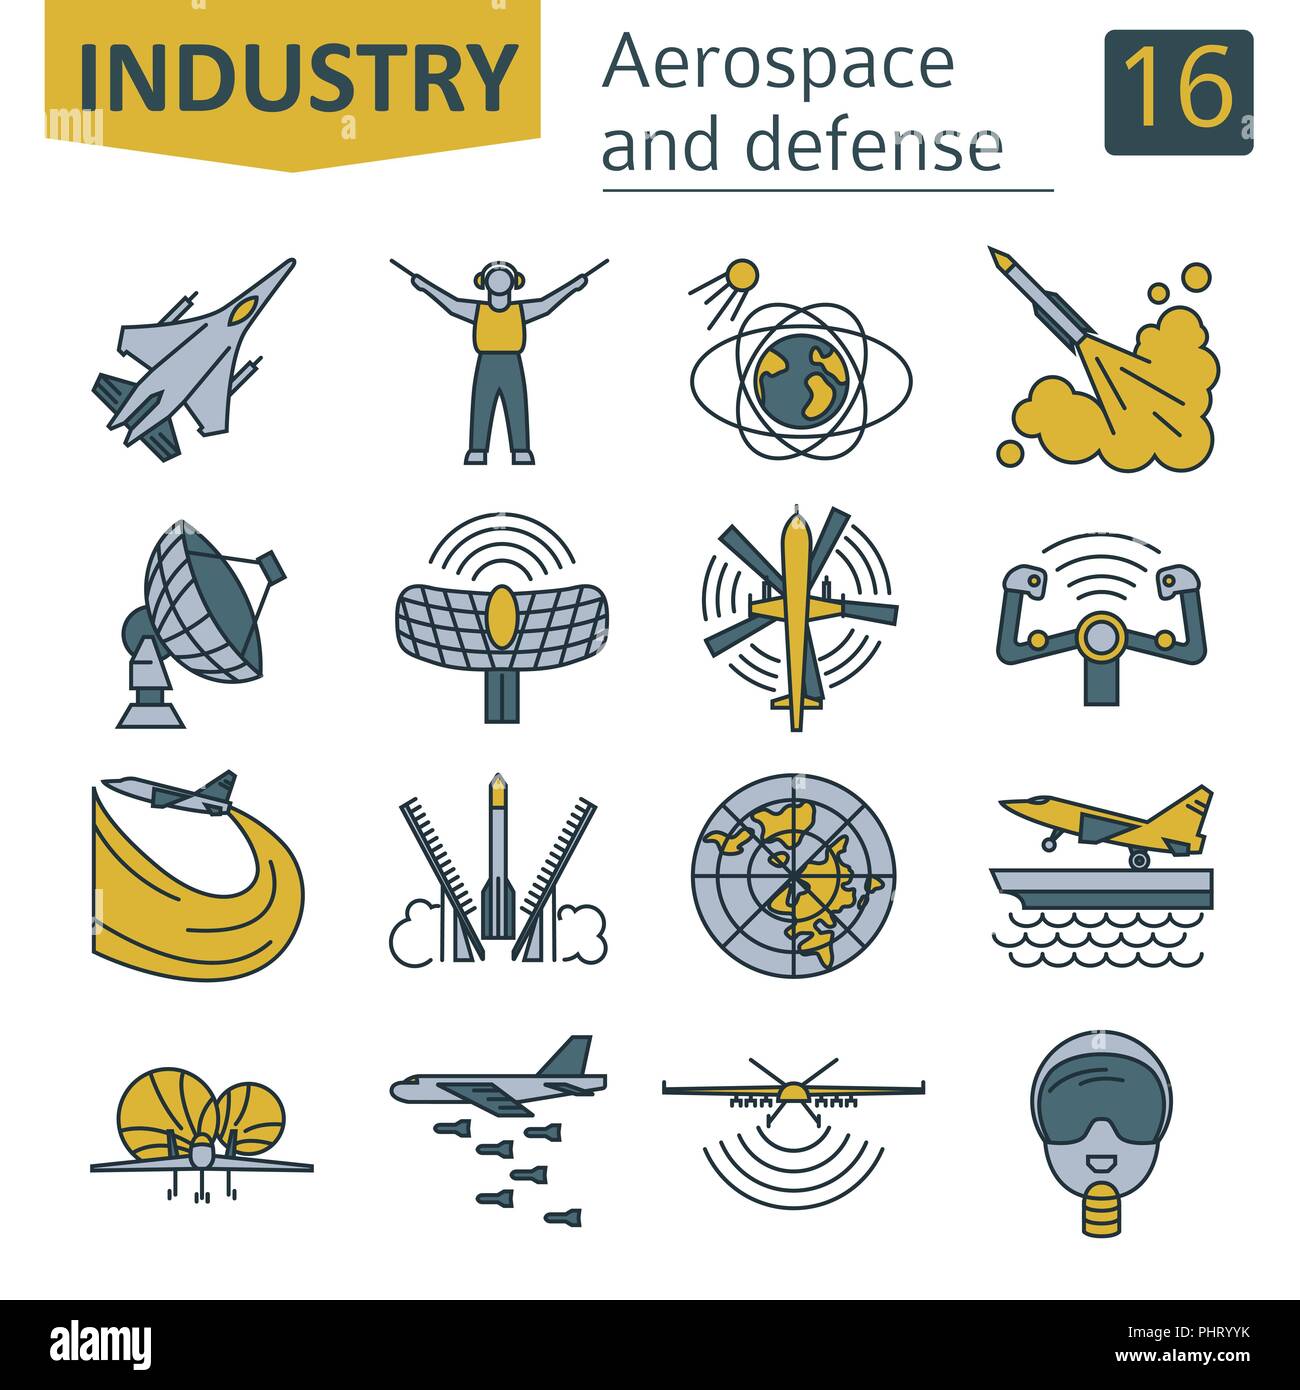 Aerospace and defense, military aircraft icon set. Thin line design for creating infographics. Vector illustration Stock Vector